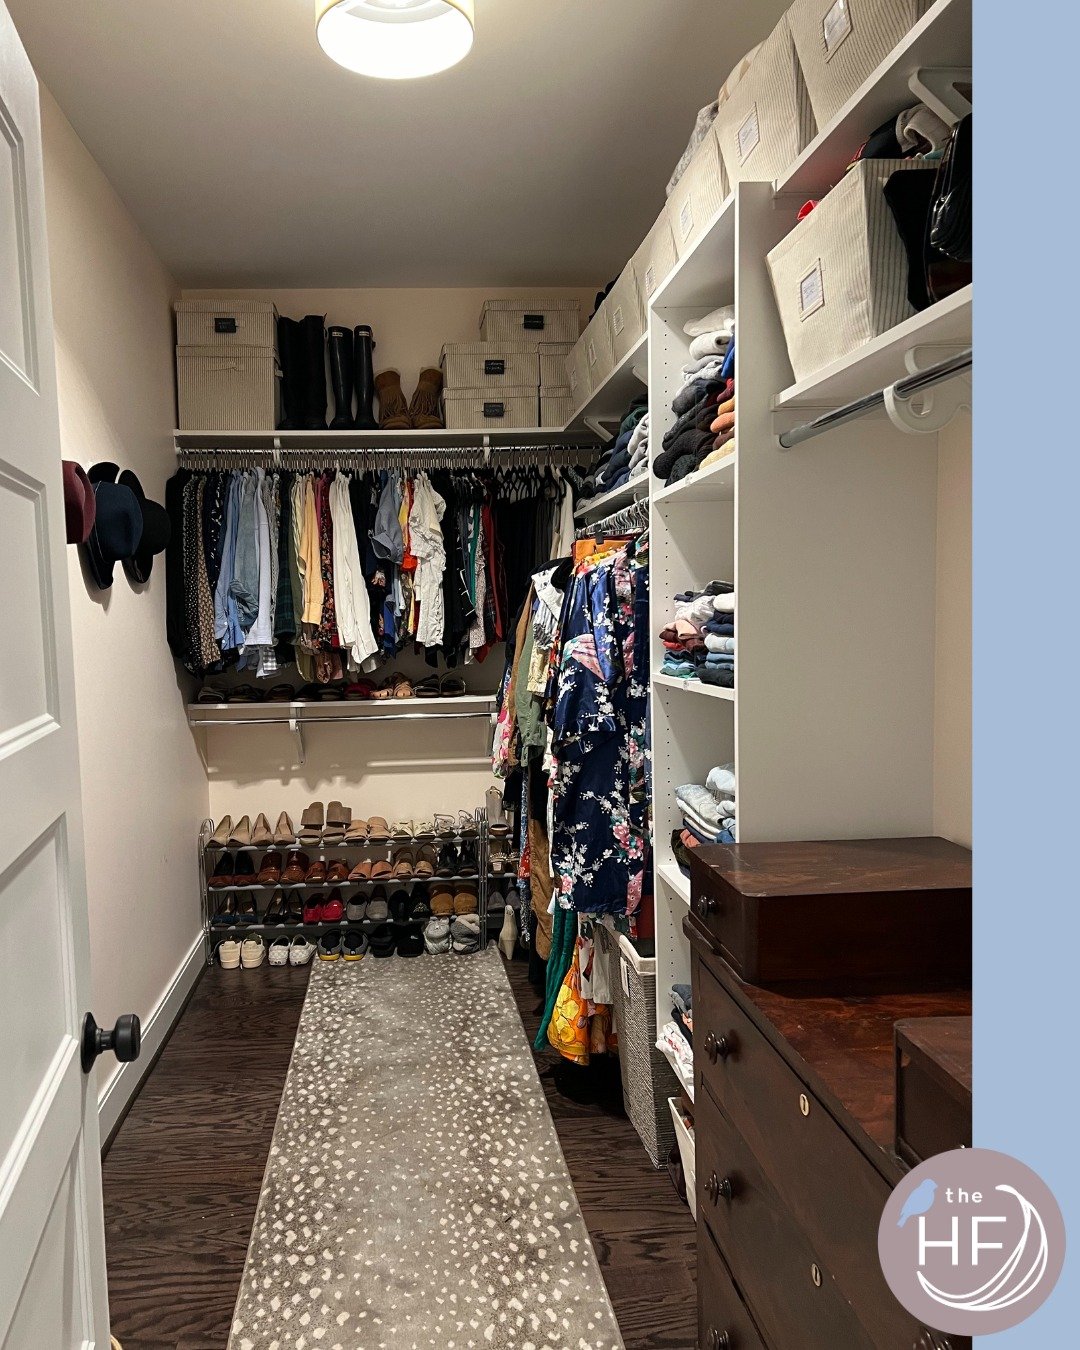 🌟 Say Hello to Clutter-Free Bliss! 🌟

By utilizing the existing framework and adding adorable bins and totes, we've created an oasis of organization. Say goodbye to clutter and hello to seamless storage solutions! 

Swipe ➡️ to see the before! 

Re